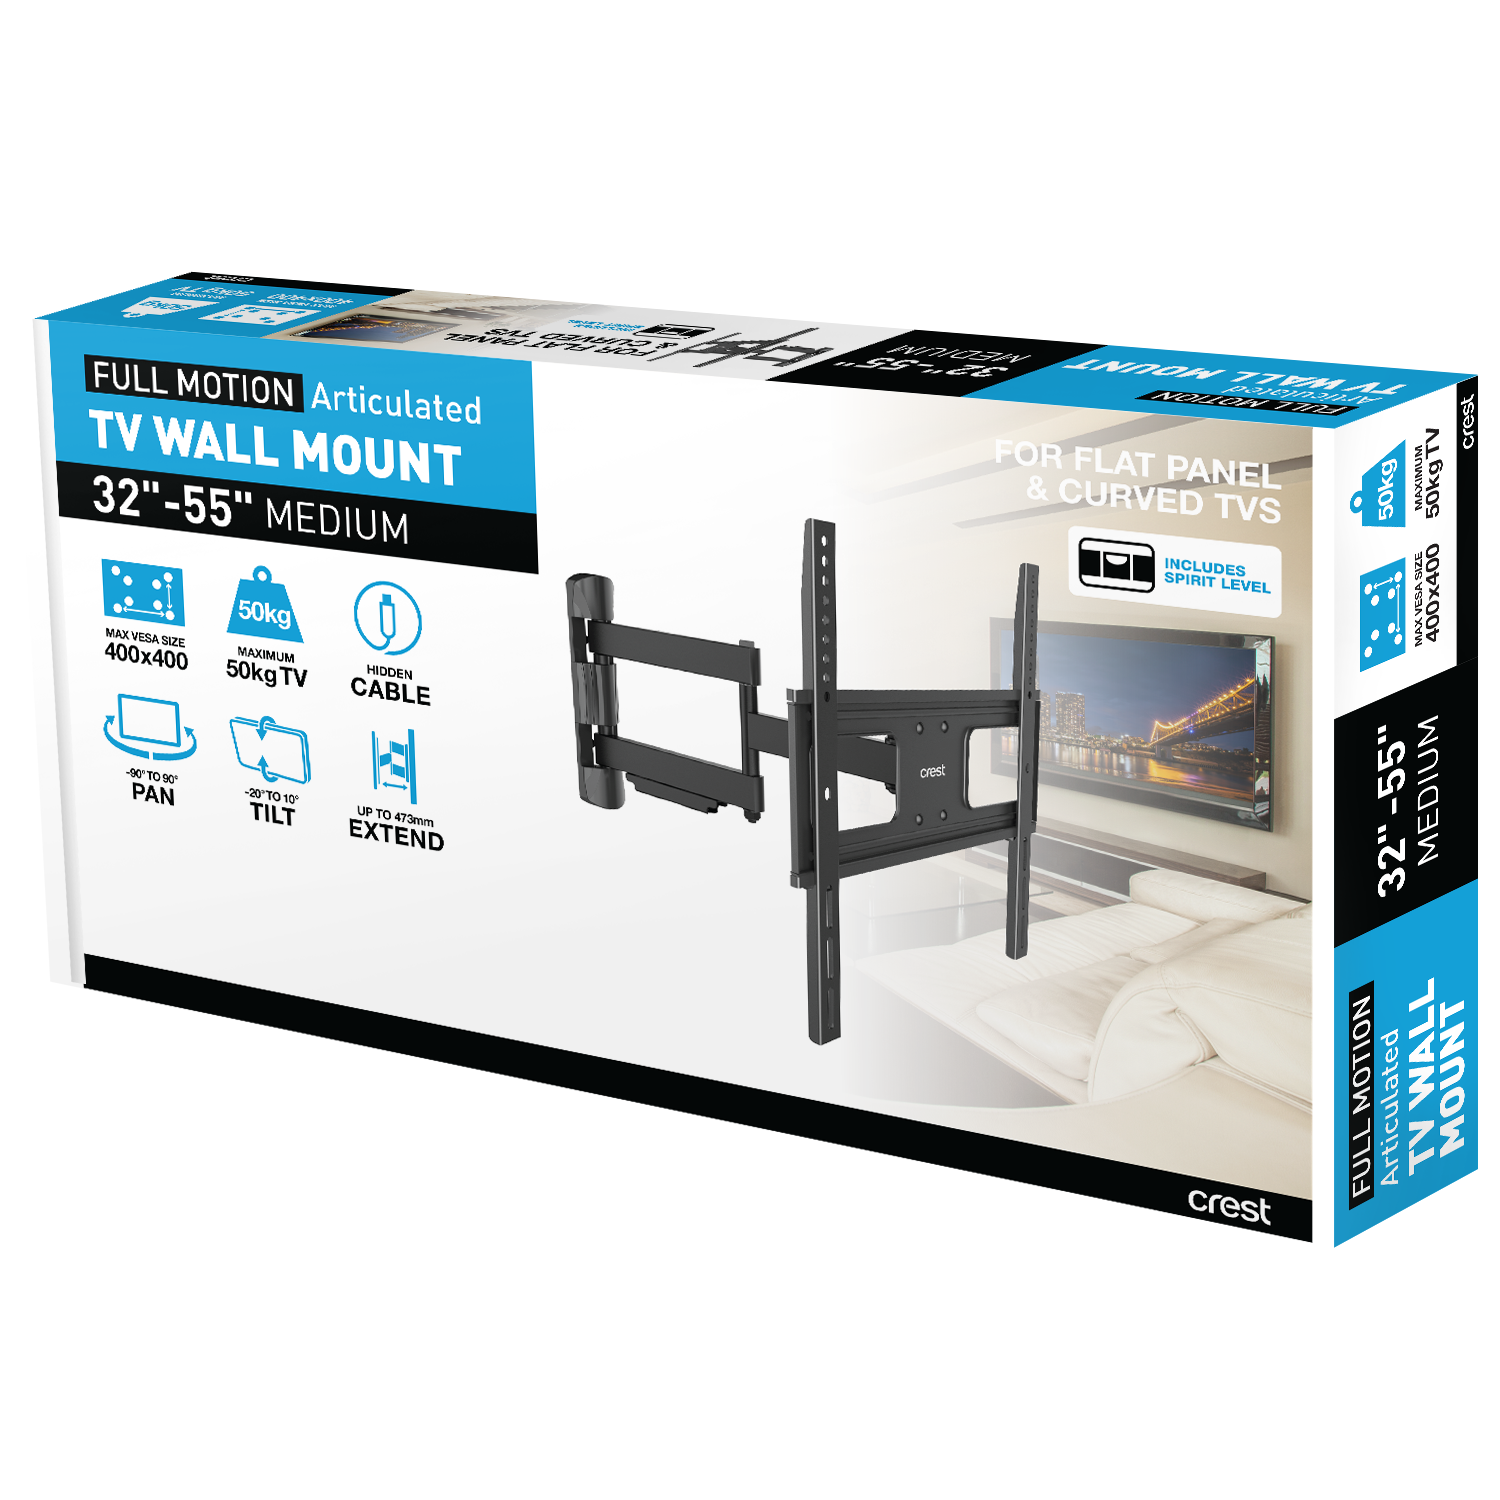 Full Motion TV Wall Mount Articulated - 32" - 55"